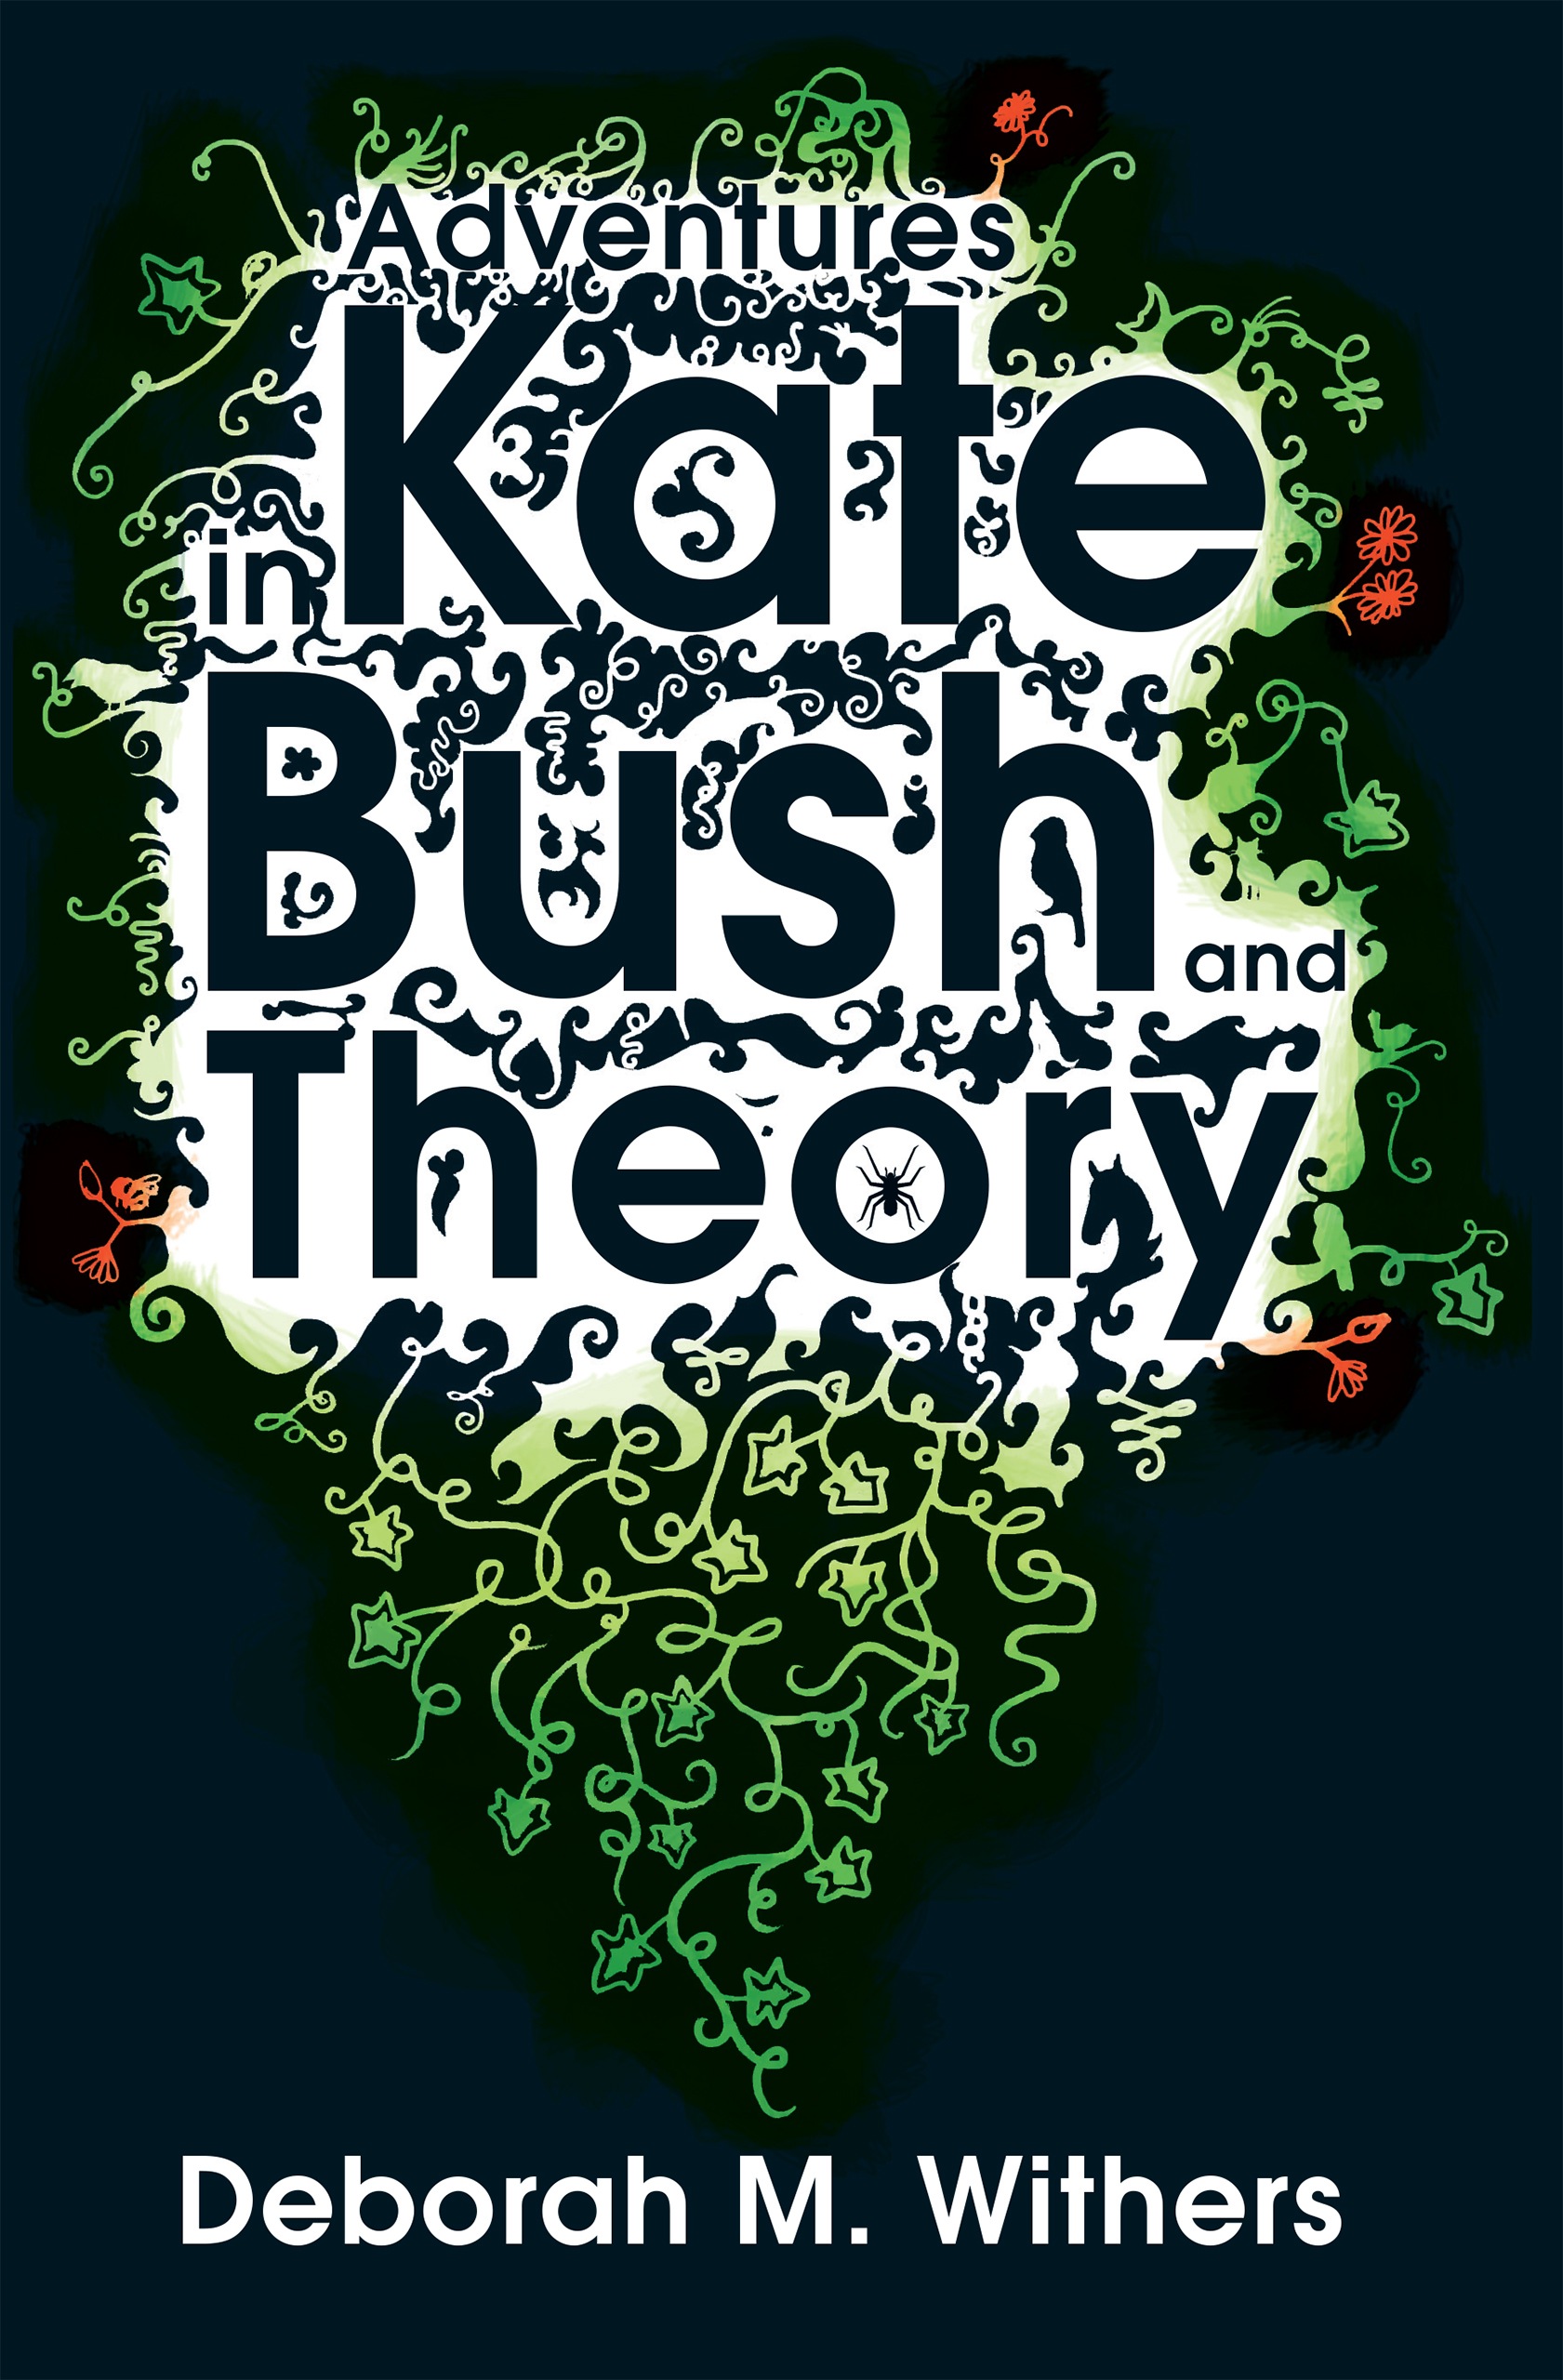 image of Adventures in Kate Bush and Theory